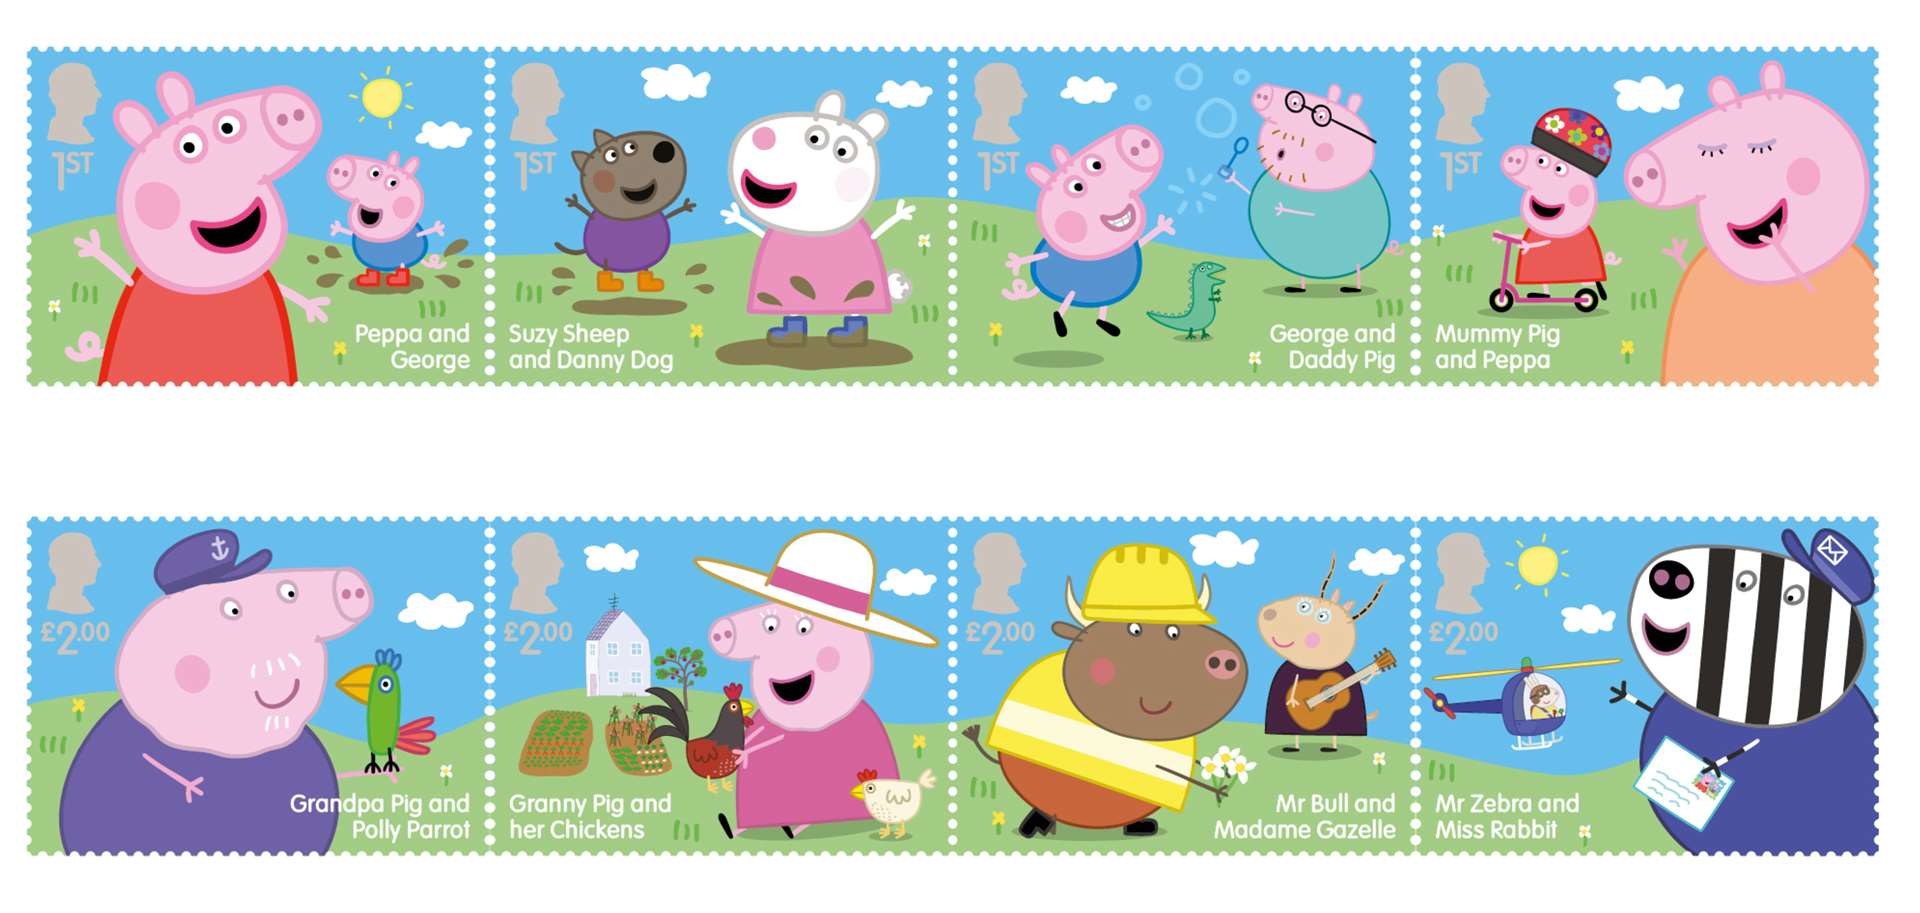 Stamps are available to buy from Royal Mail. Image: Royal Mail.